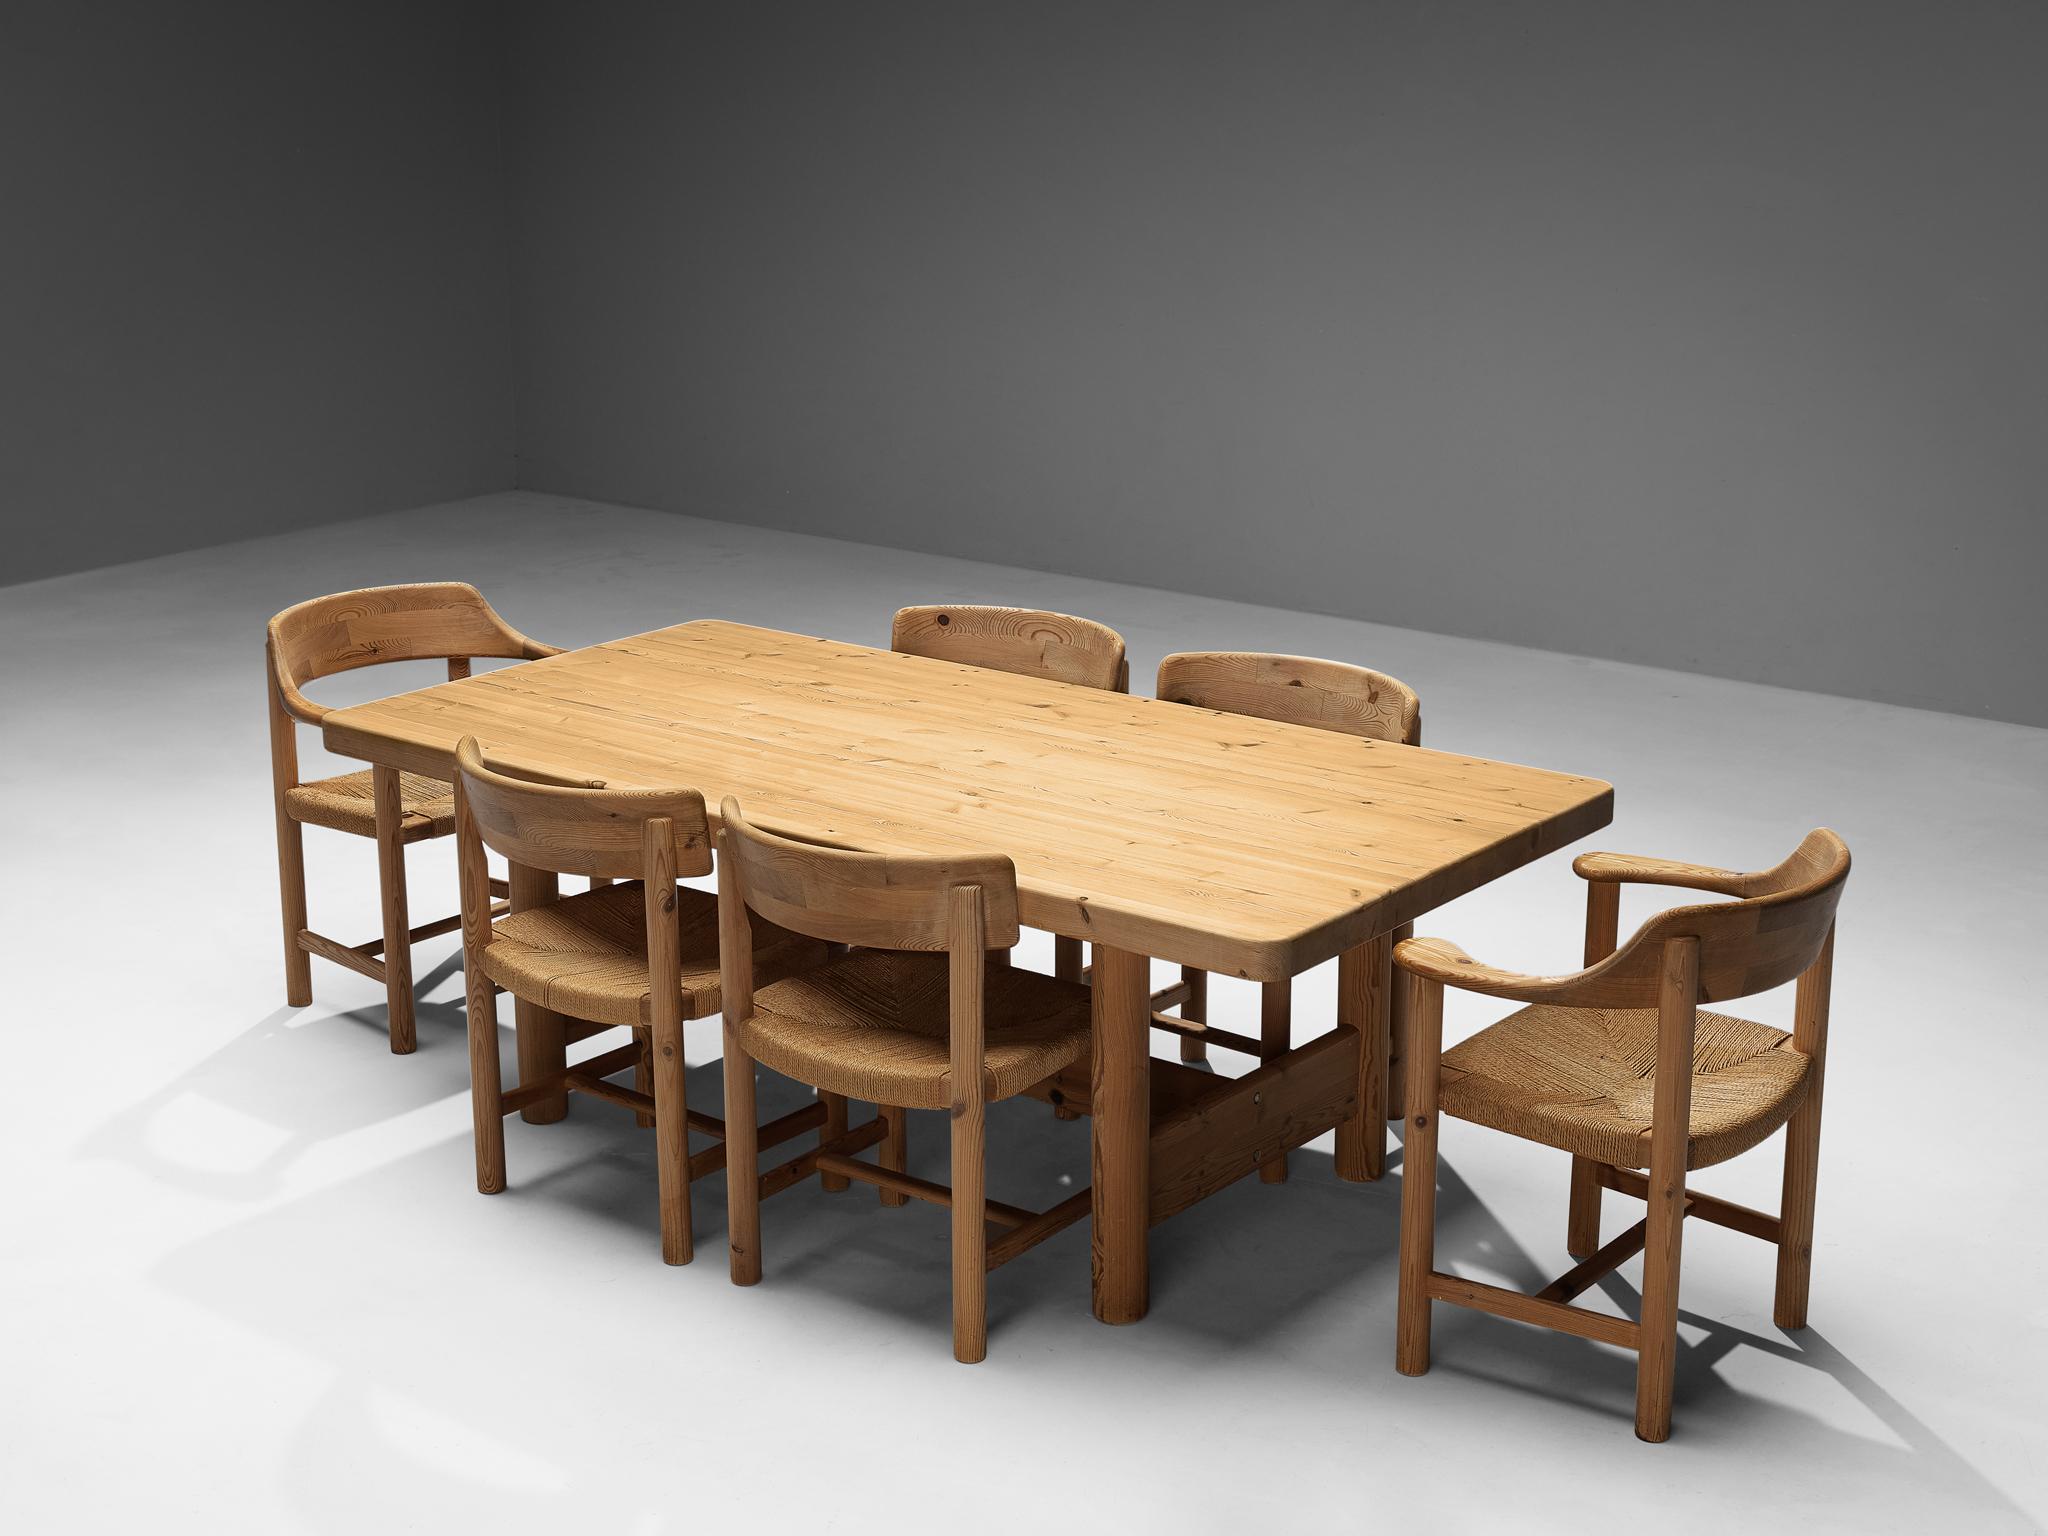 Rainer Daumiller for Hirtshals Savvaerk, dining room set with six chairs and dining table, pine, rope, Denmark, 1970s

Beautiful and natural dining room set by Rainer Daumiller. This set has it all for the one that loves a natural and fresh